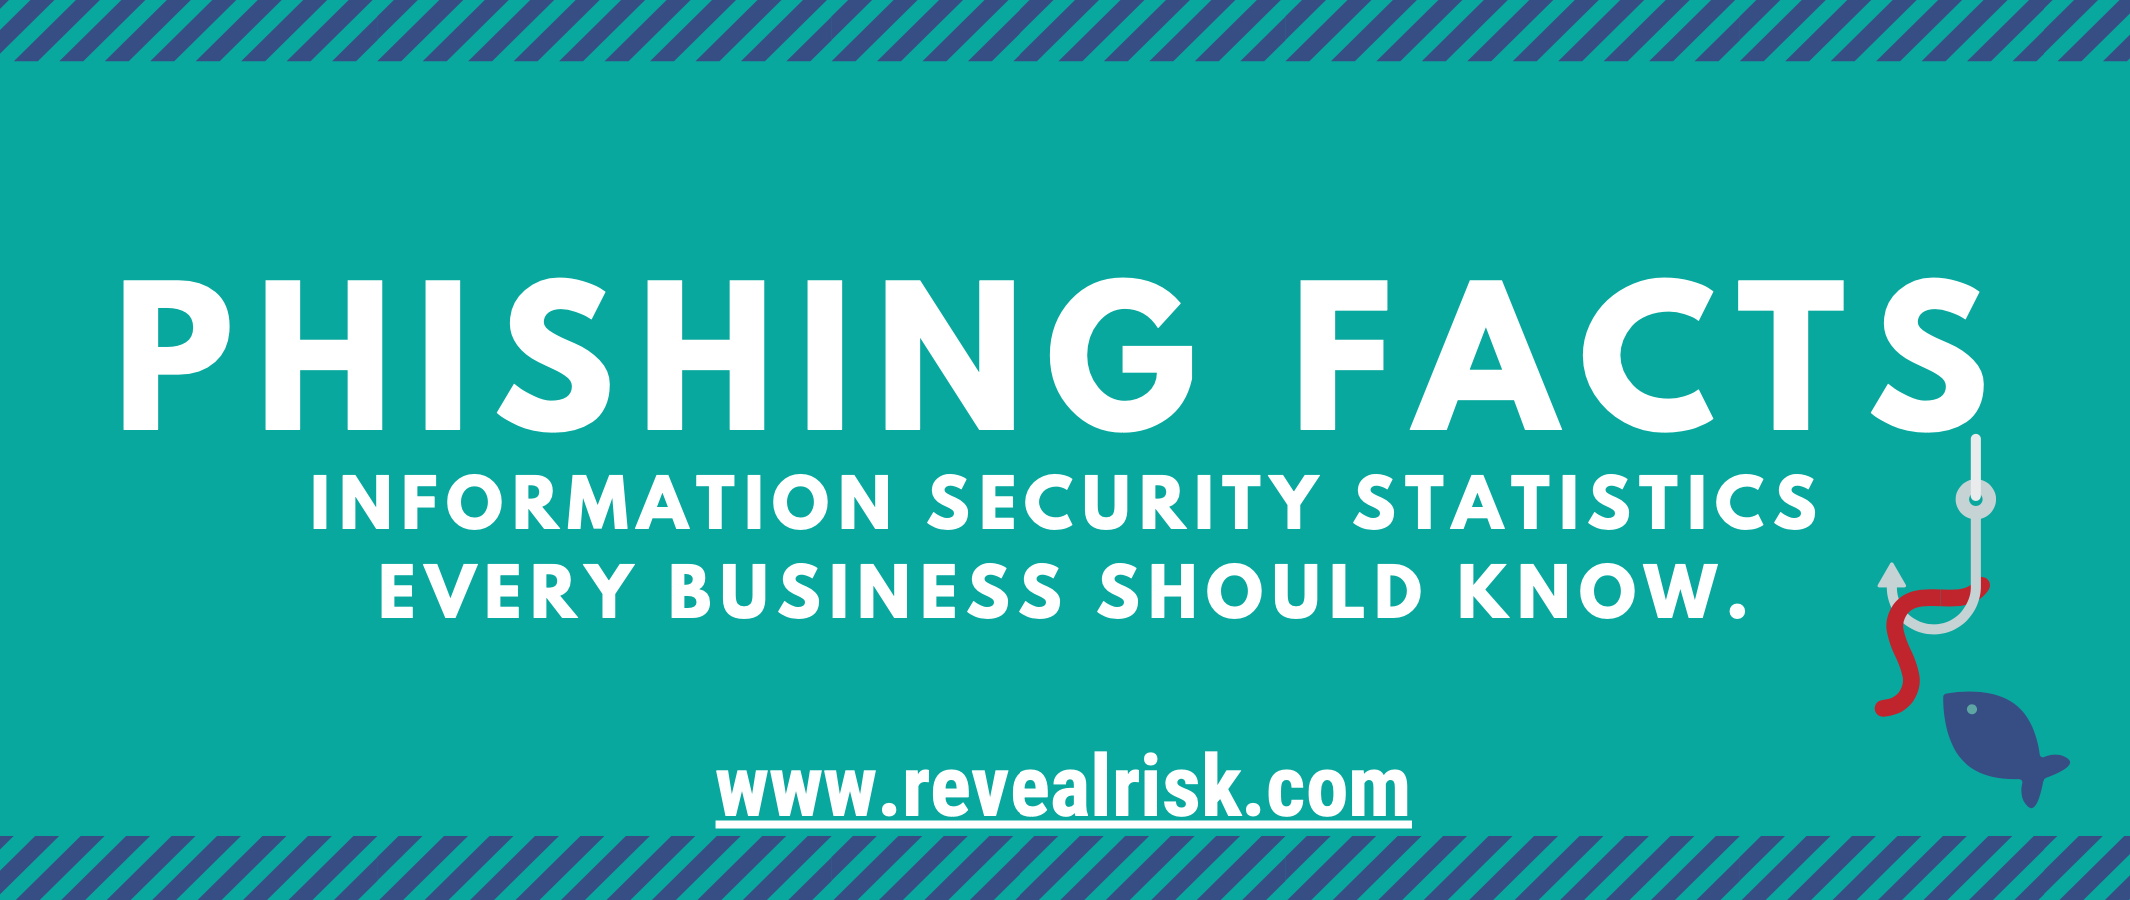 Information Security Statistics Every Business Should Know